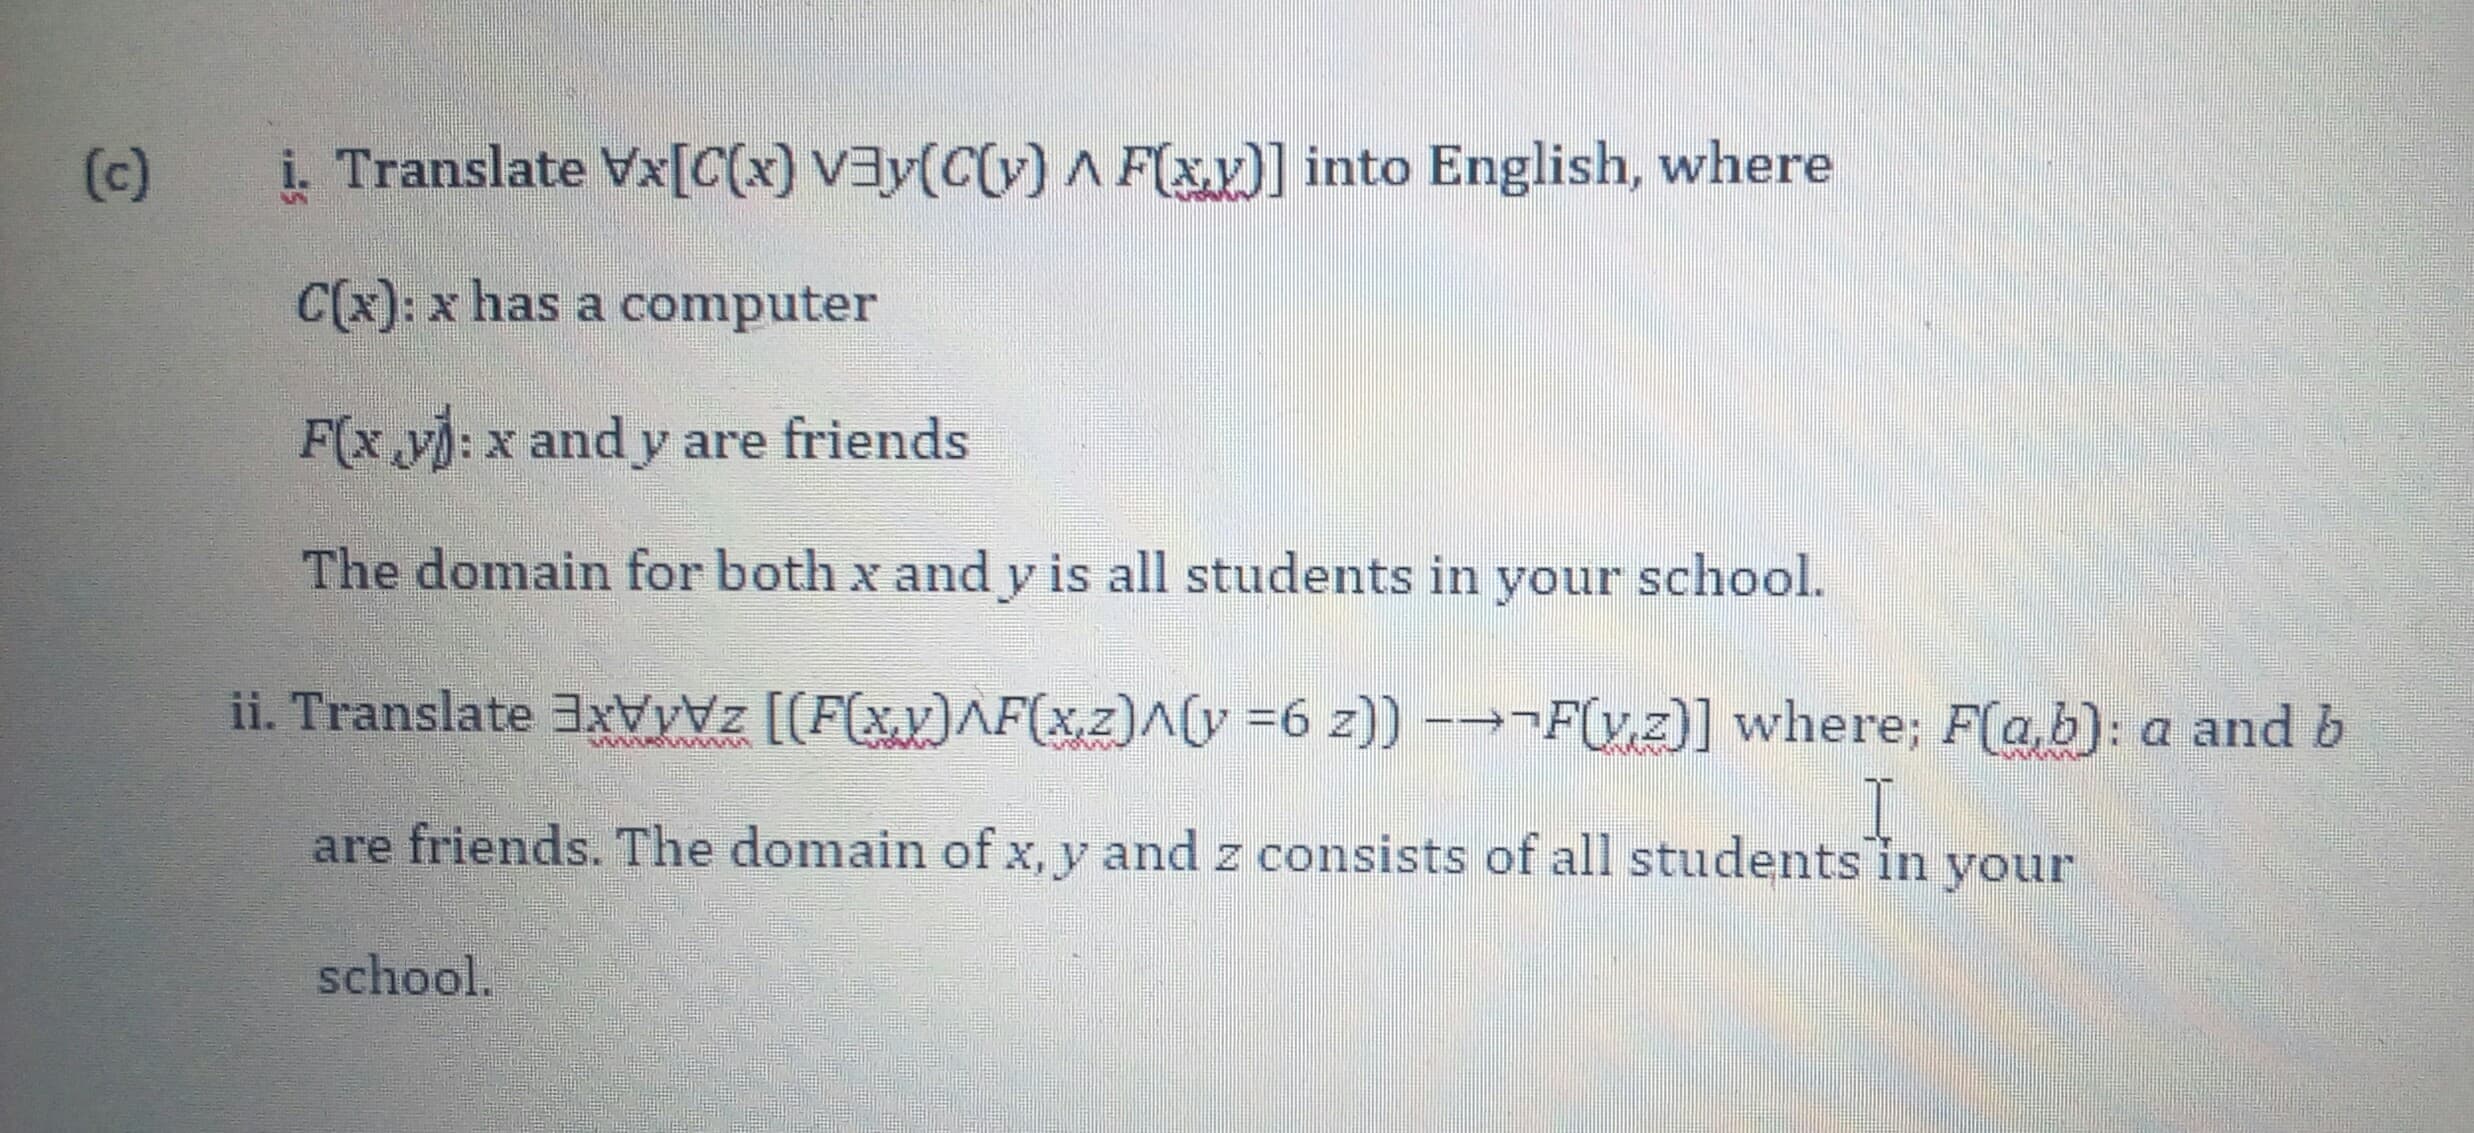 i. Translate Vx[C(x) V3y(C(v) A F(xy)] into English, where
C(x): x has a computer
F(x y): x and y are friends
The domain for both x and y is all students in your school.
ii. Translate 3xvyz [[F(xv)^F(xz)^(y =6 z)) -→¬F(y,z)] where; F(a,b): a and b
are friends. The domain of x, y and z consists of all students in your
school.
